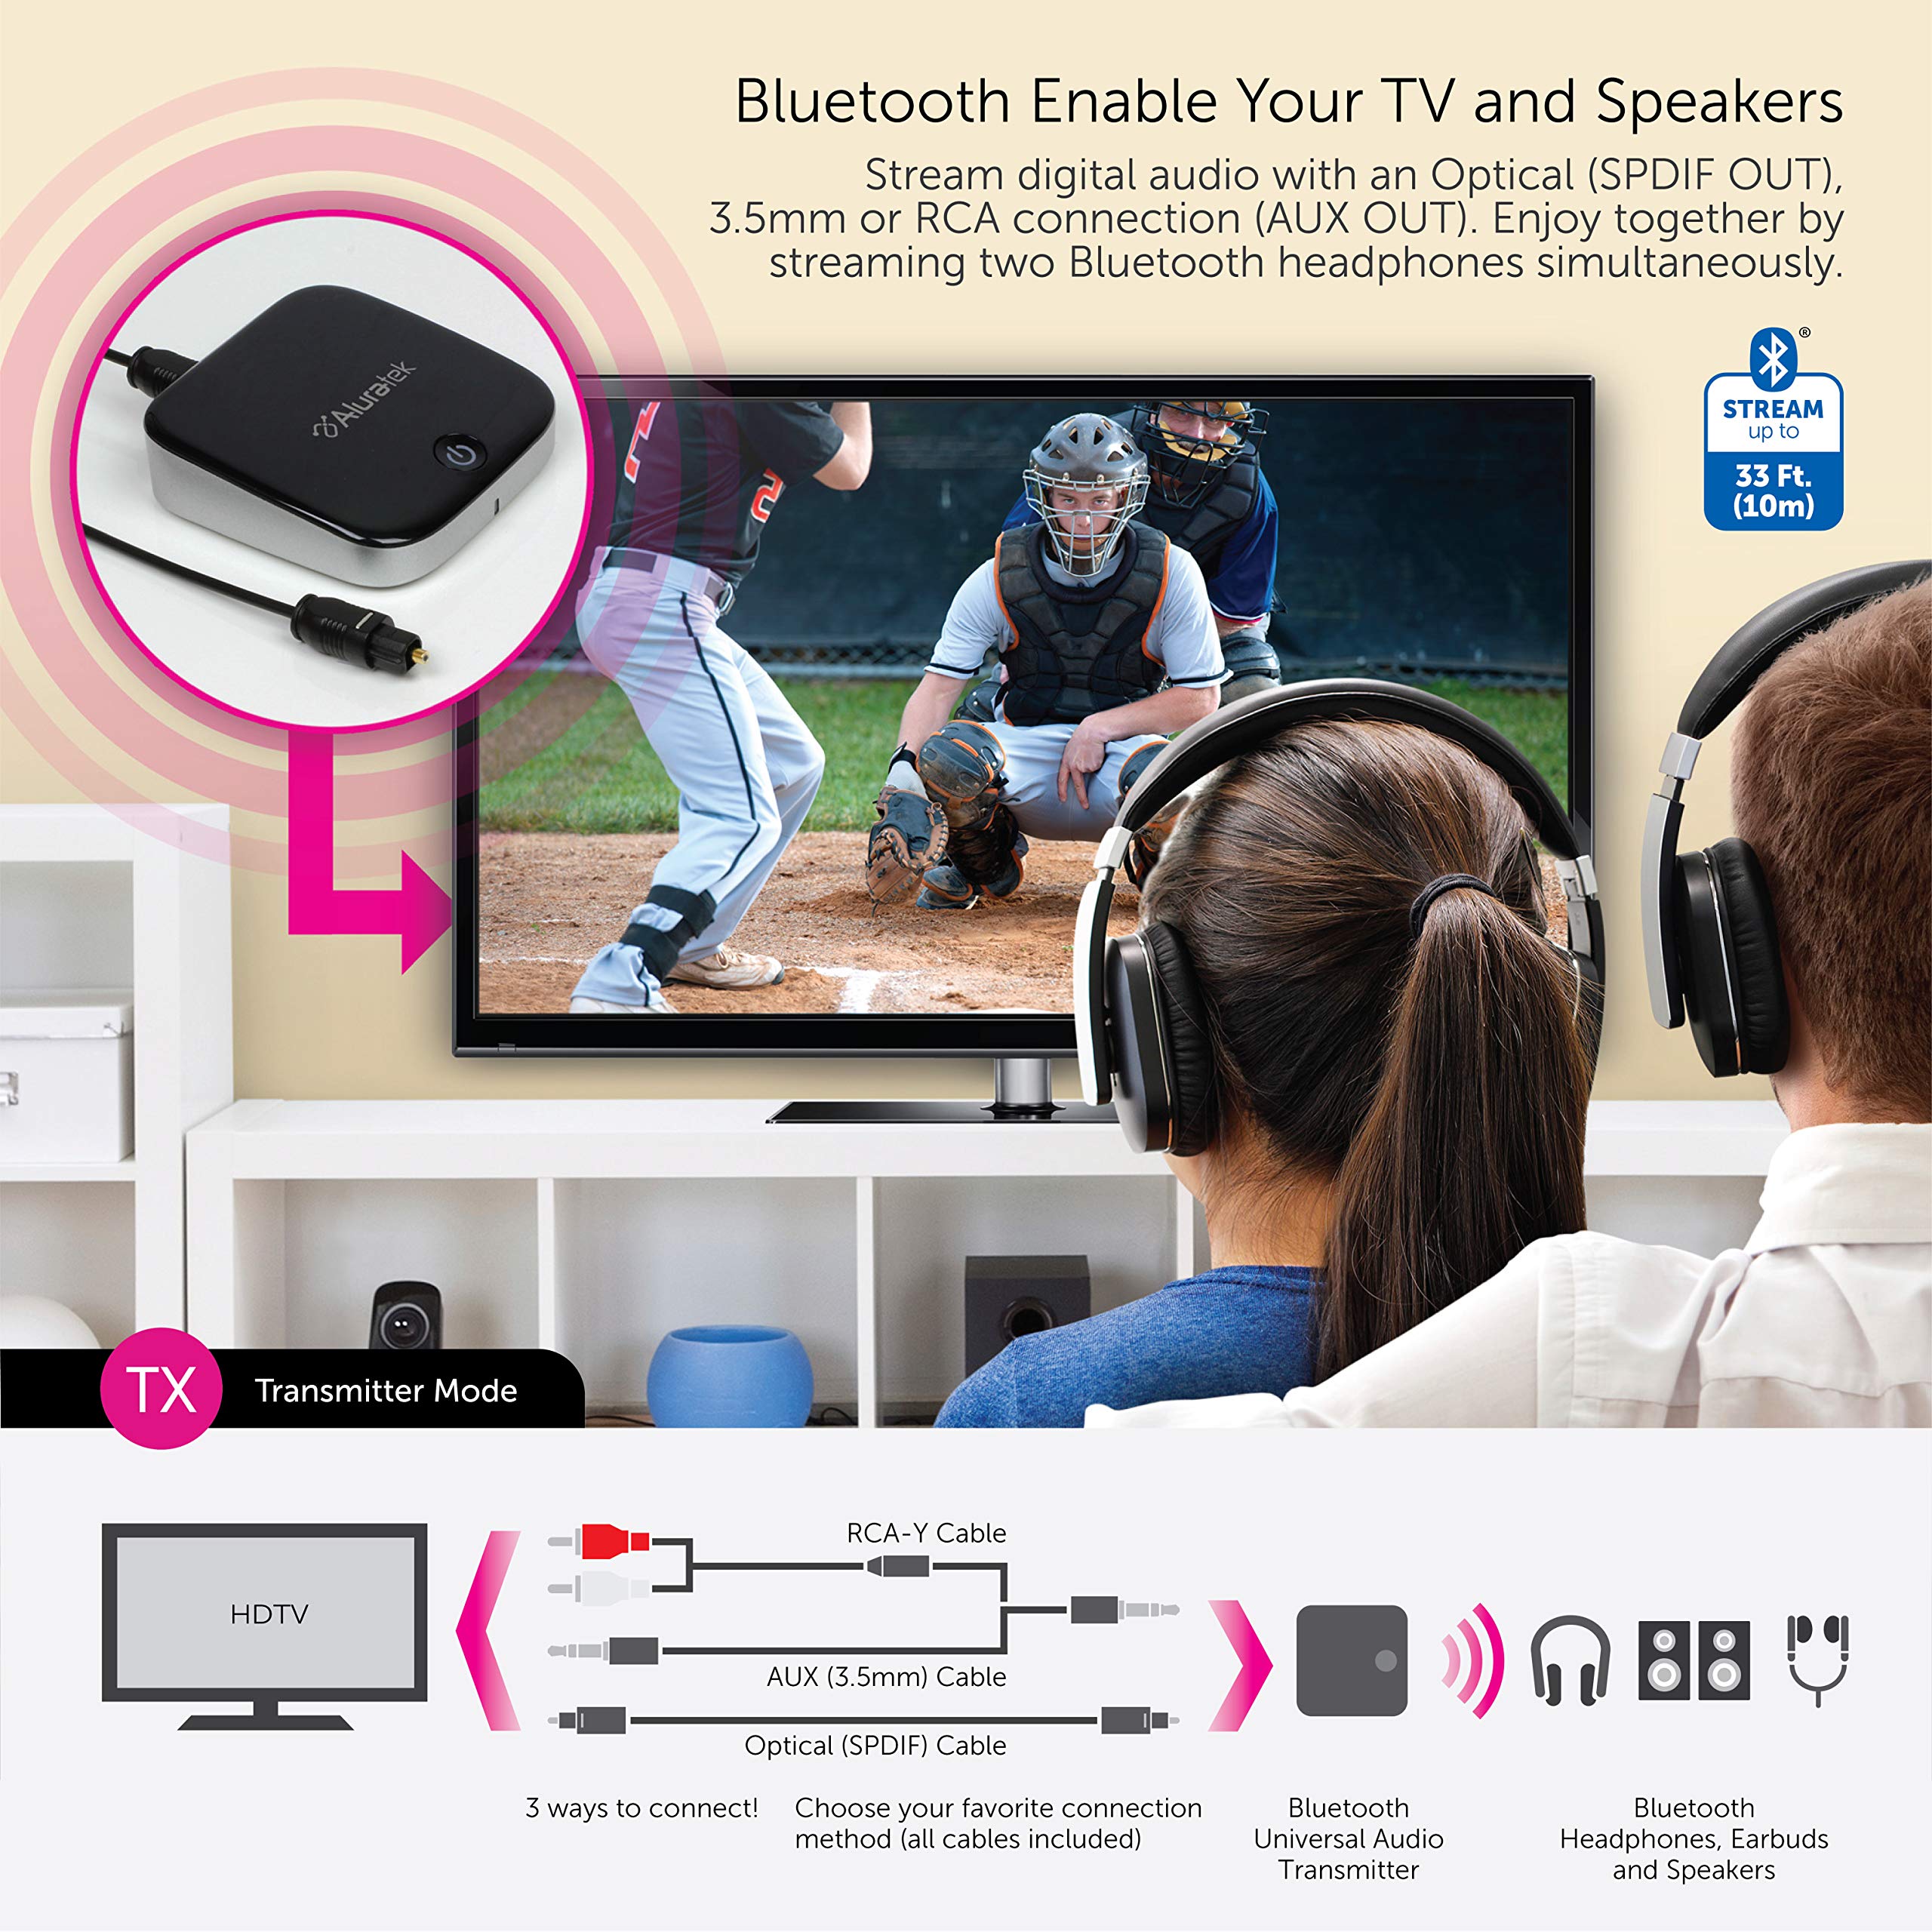 Aluratek ADB1B Bluetooth Audio Receiver and Transmitter, 2-in-1 Wireless 3.5mm, AUX, Optical Audio Adapter, Pairing with 2 Bluetooth Headphones Simultaneously in Transmitter Mode